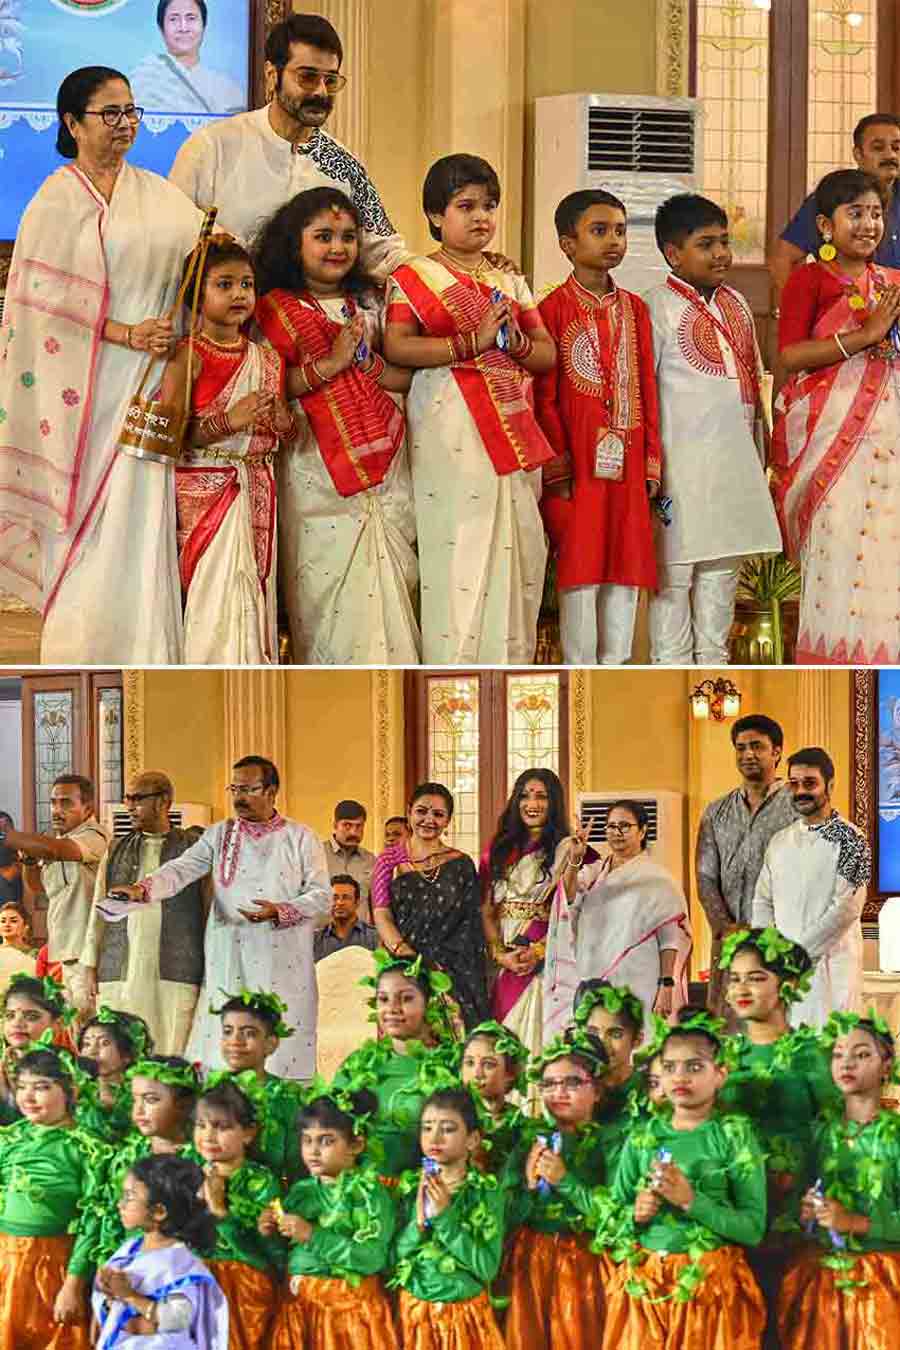 Mamata Banerjee called upon several little girls from among the performers on Red Road and lavished praise on them. Celebrities such as Prosenjit ‘Bumba’ Chatterjee, June Maliah, Rituparna Sengupta and Dev Adhikari joined in 